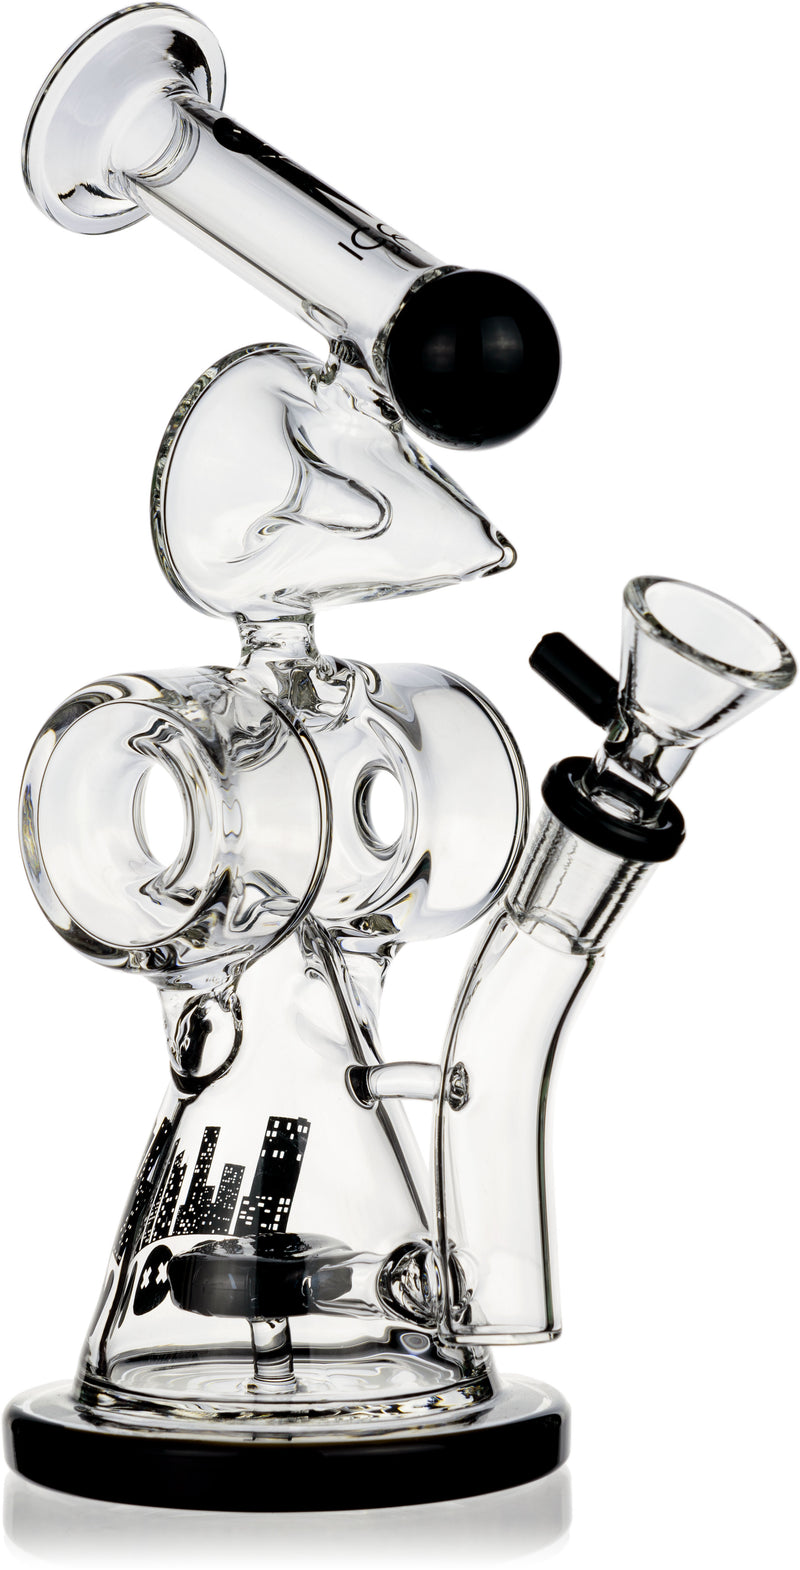 9" Twin Cylinder Rig, by ICON Glass - Bat Kountry